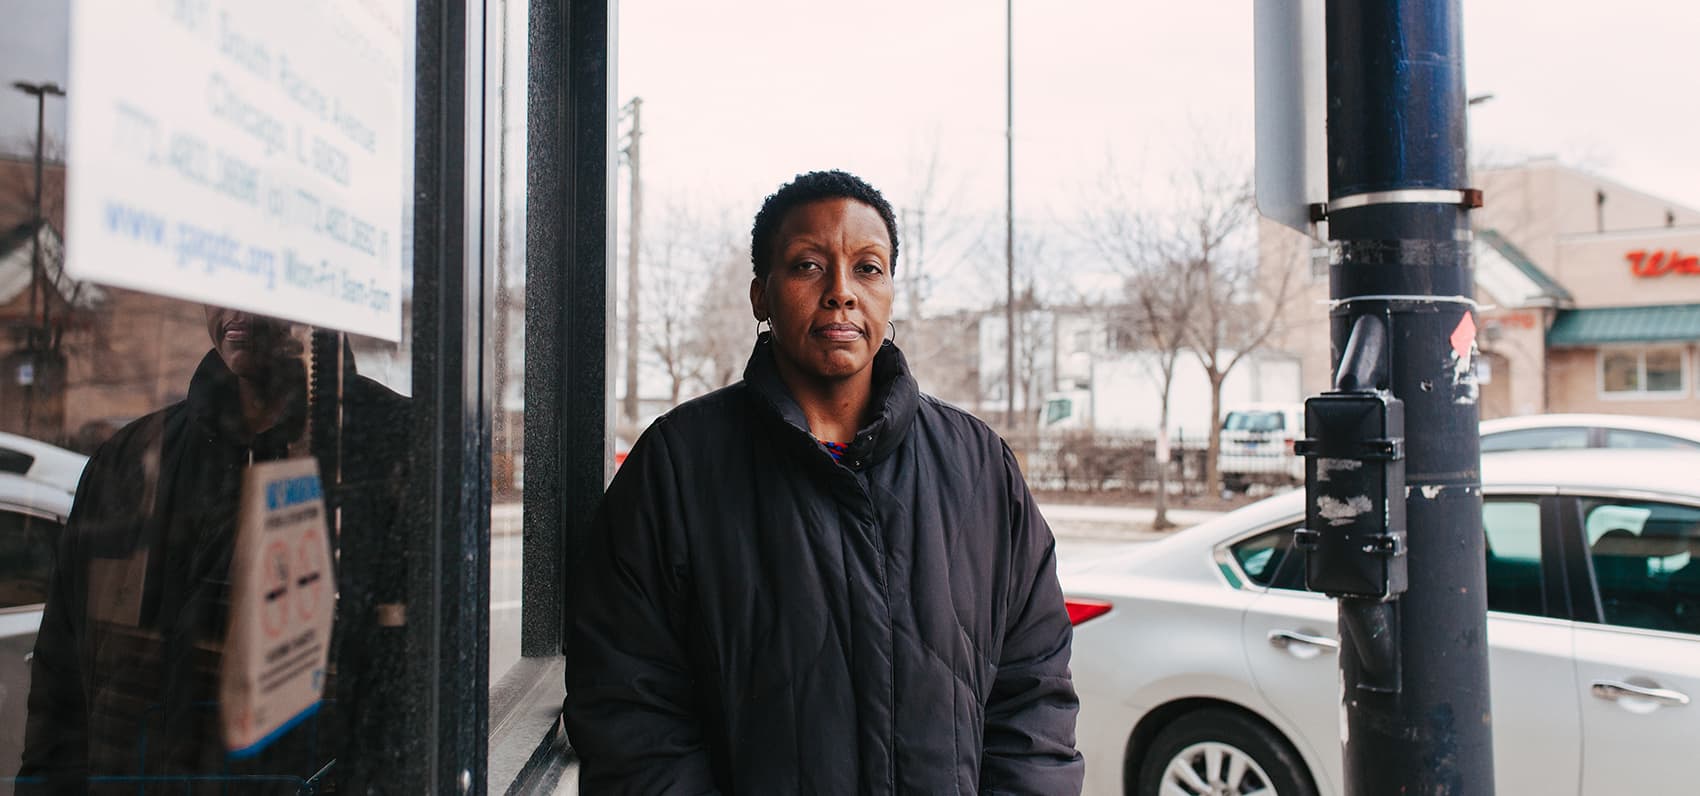 Kathryn Welch, who works at the Greater Auburn-Gresham Development Corporation in Chicago, stands at the same spot where she witnessed gunfire in the lot across the street. &quot;It was a summer day and I was walking to Walgreens and I heard these pops,&quot; she says. Welch has moved from the city to South Holland, Ill., a Chicago suburb. (Danielle Scruggs for Here & Now)